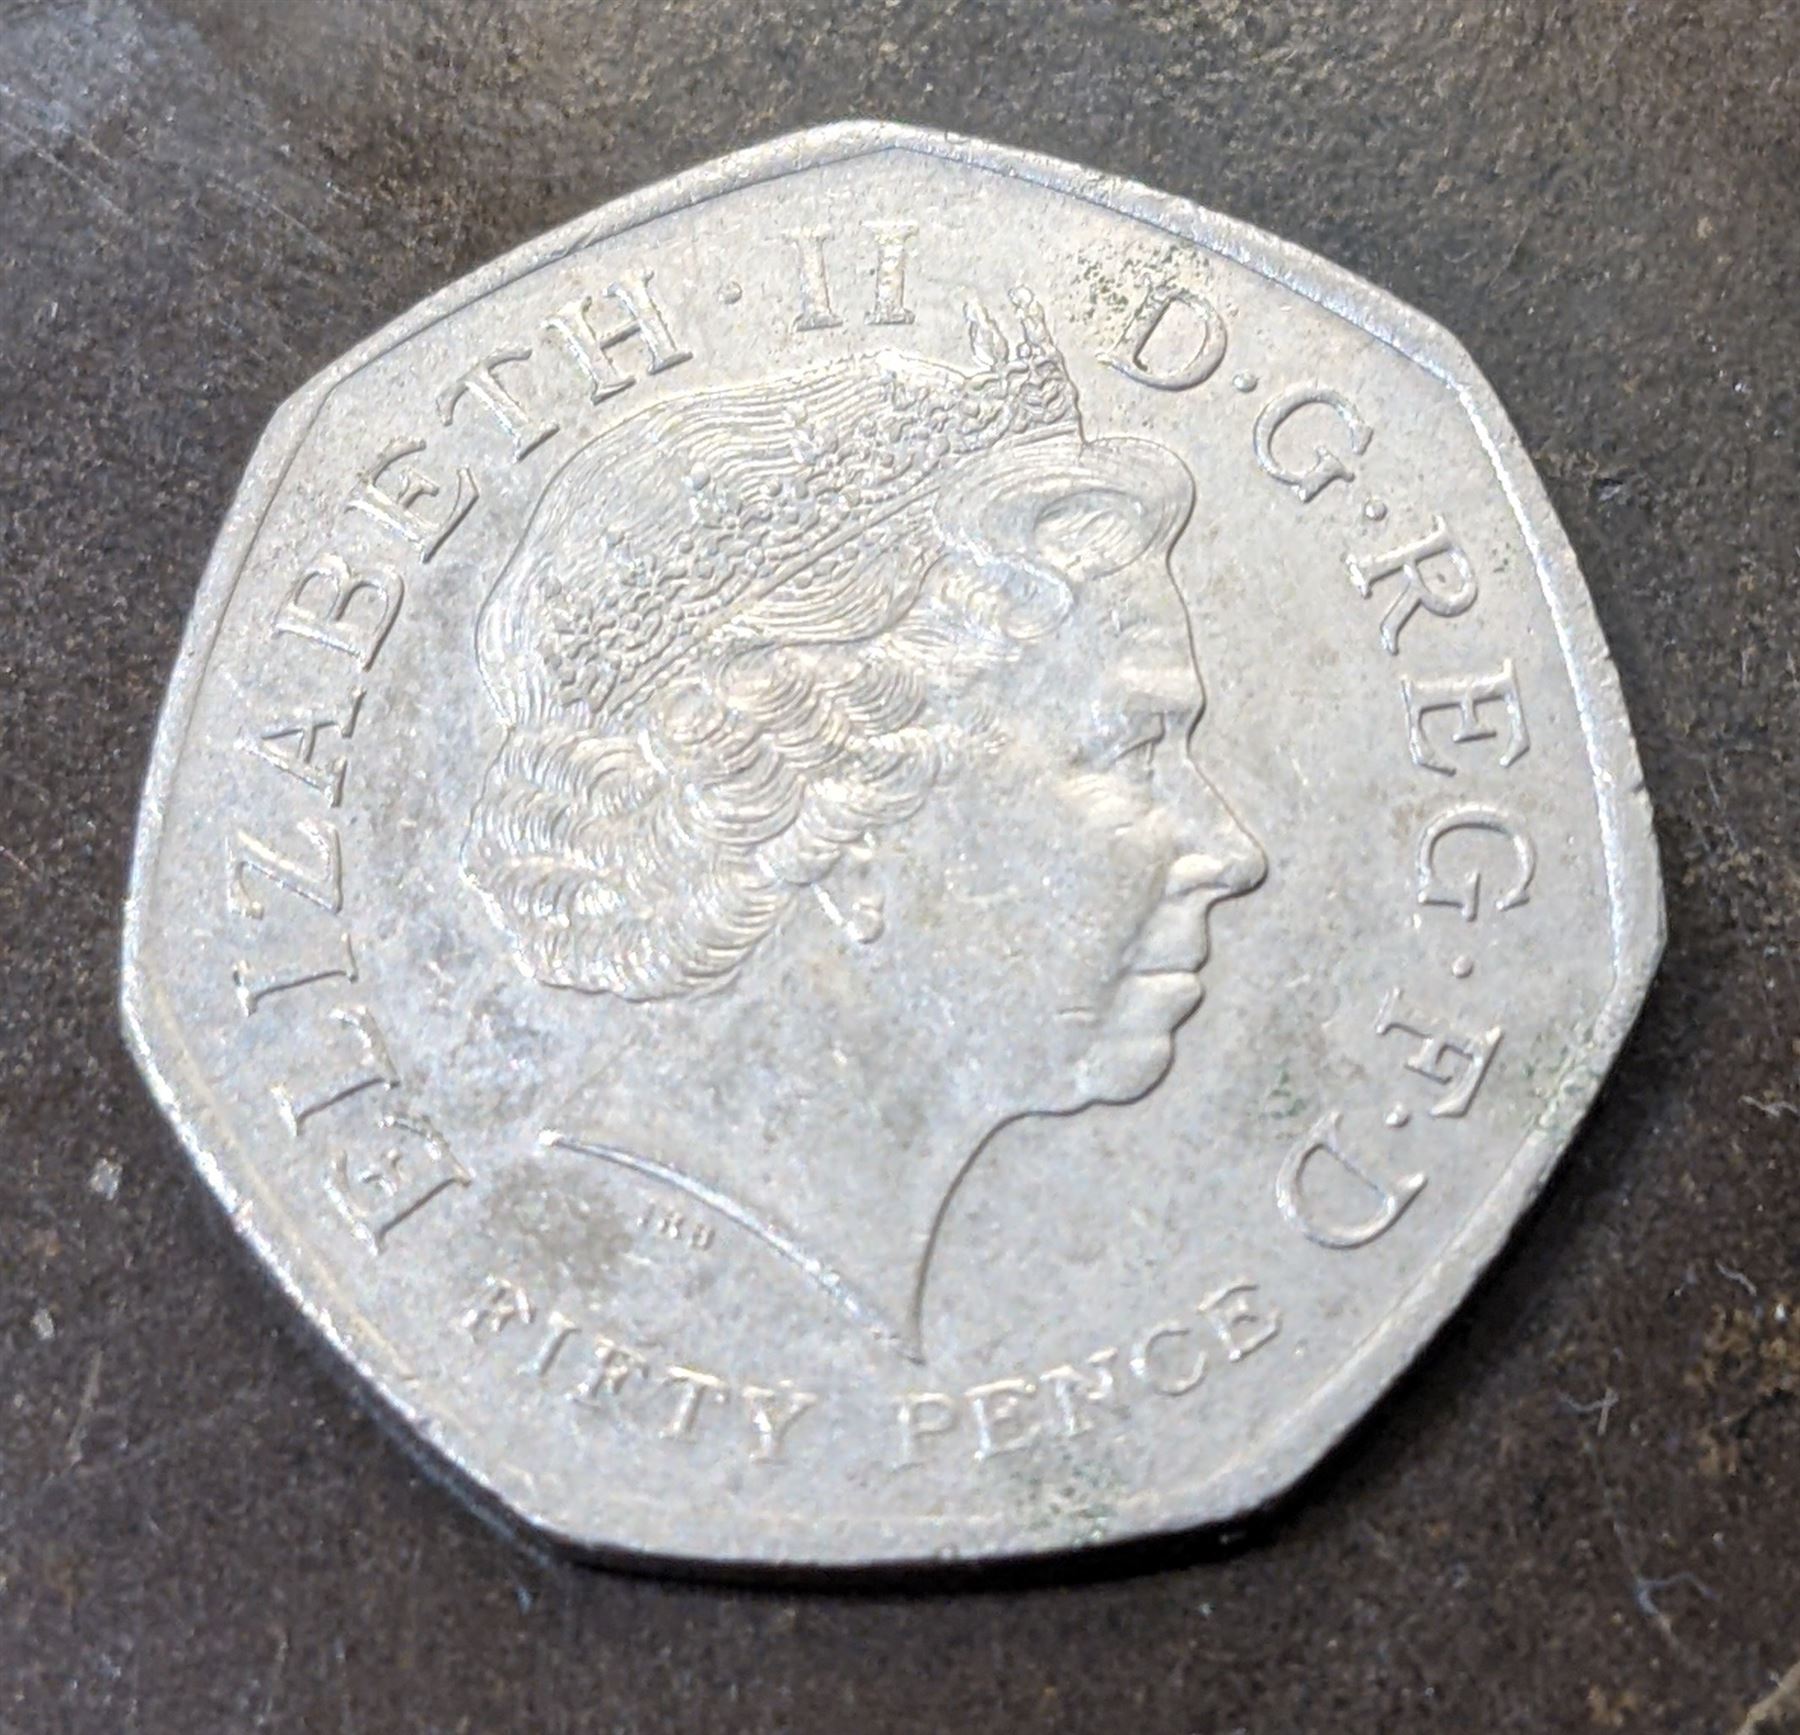 Queen Elizabeth II United Kingdom fifty pence twenty-six coin collection - Image 3 of 3